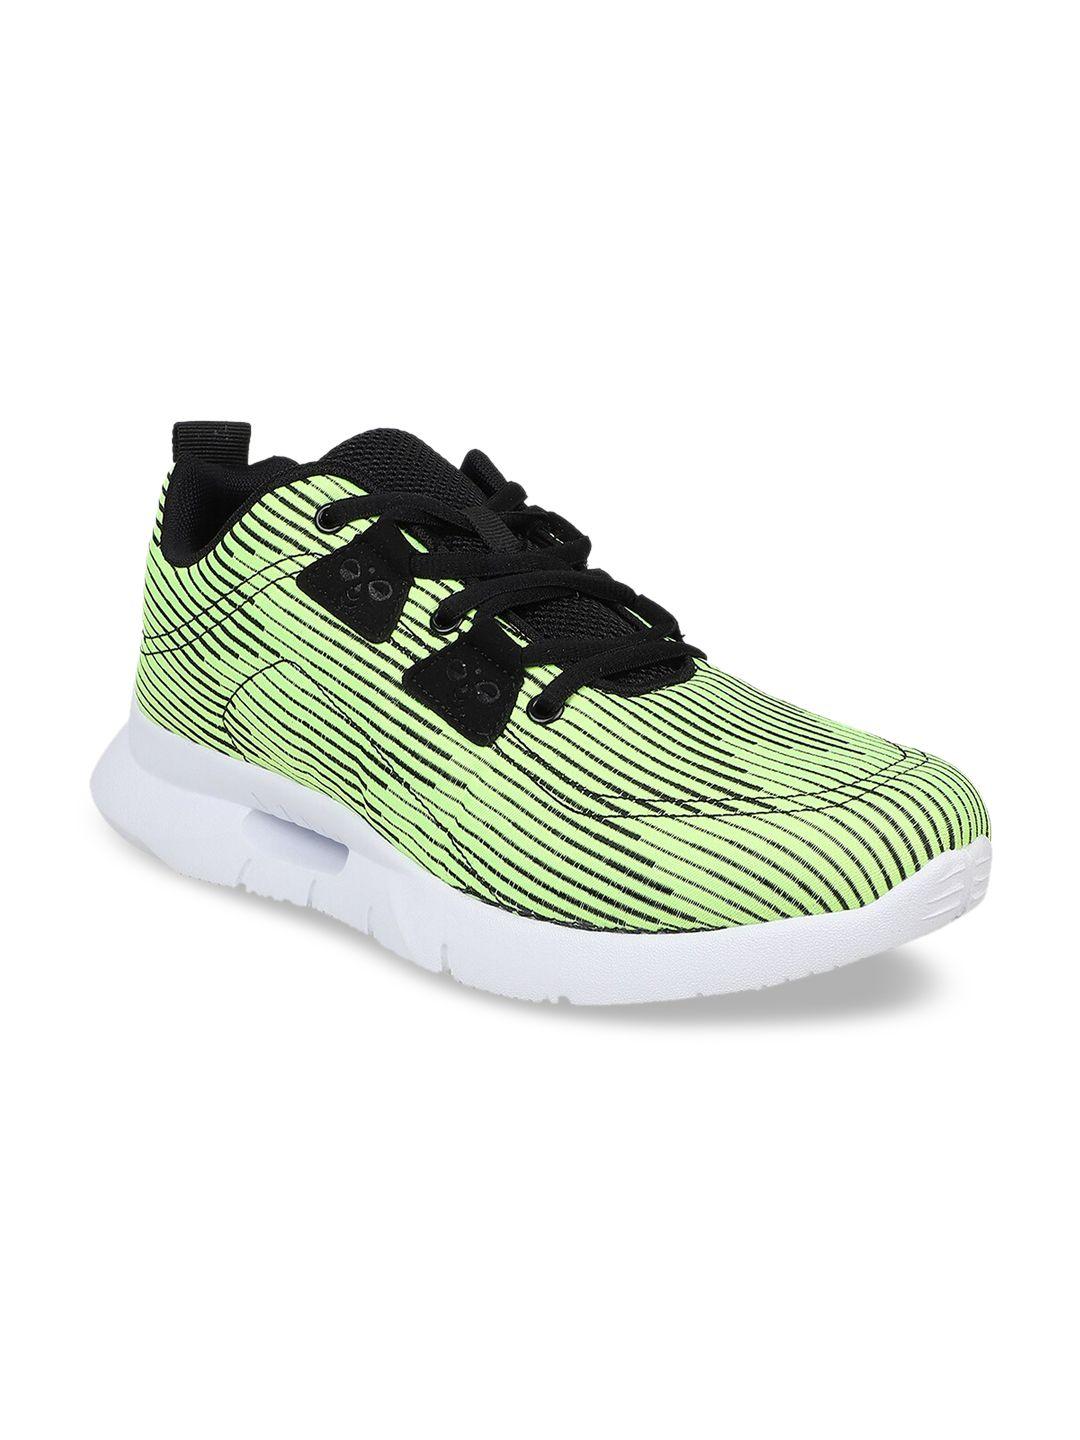 hummel unisex green synthetic training or gym shoes